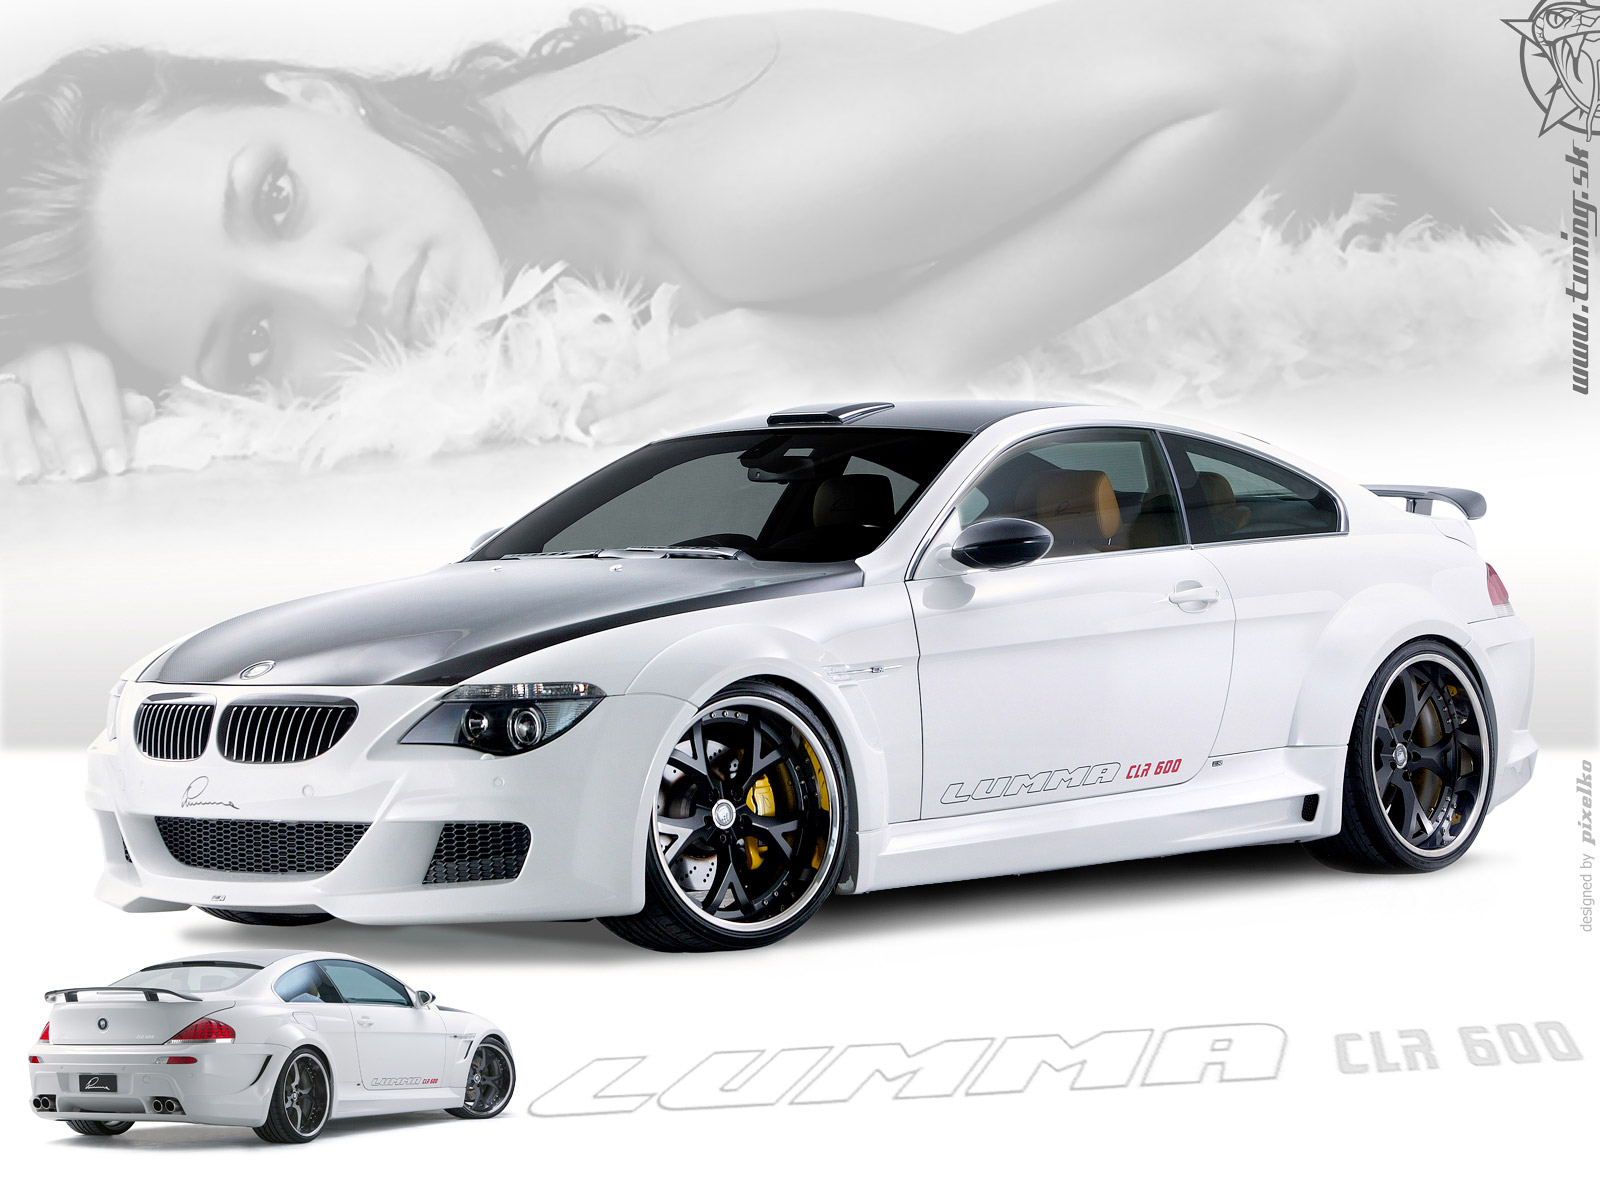 The Related Wallpaper Of Bmw M6